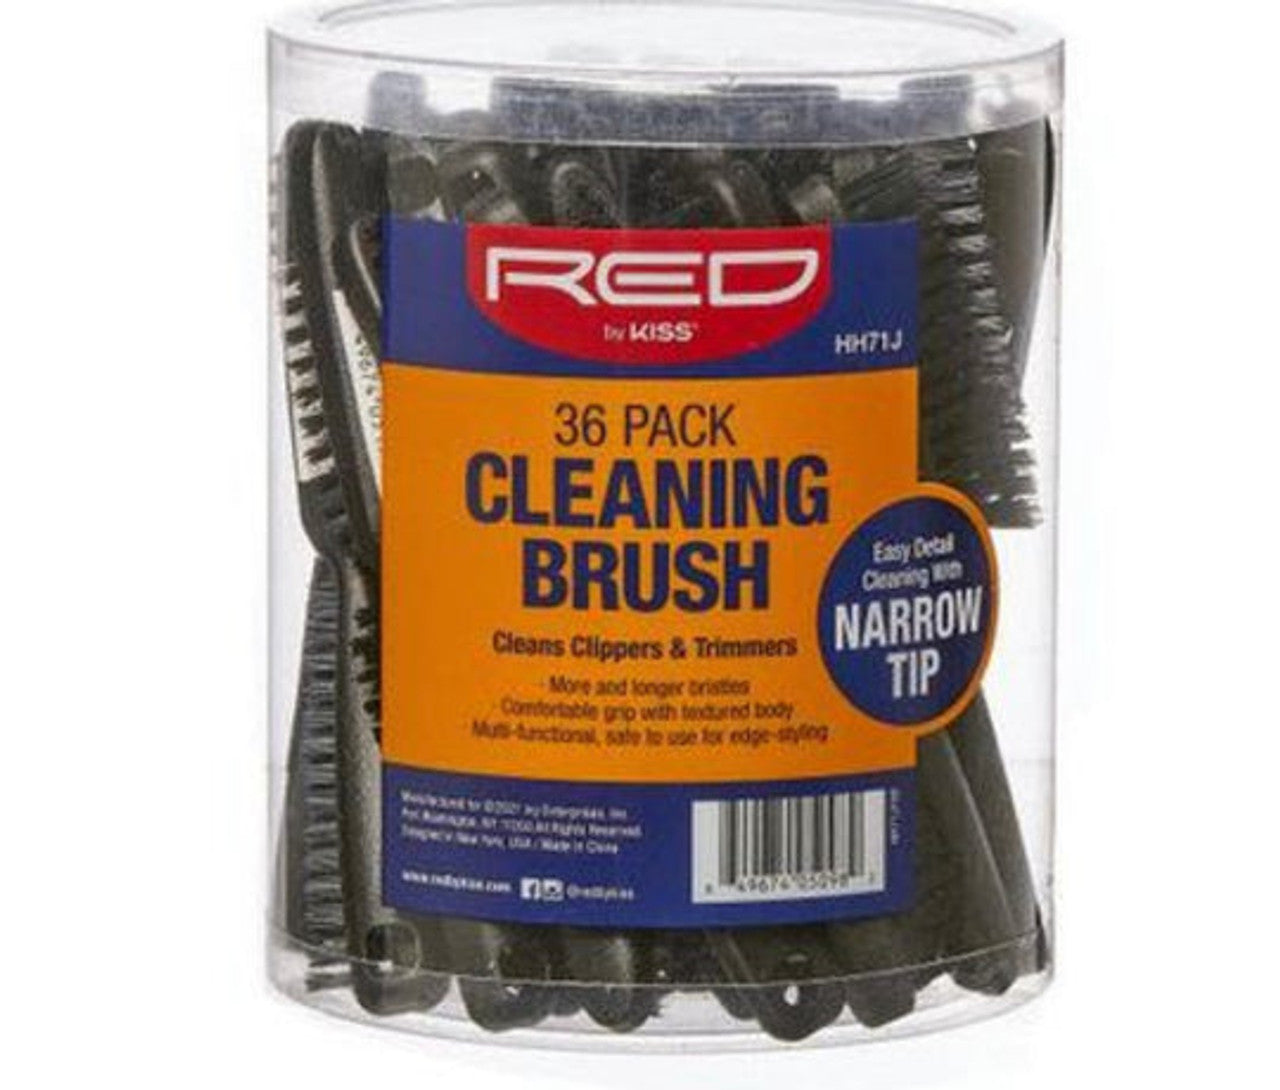 Red By Kiss Clipper / Trimmer Cleaning Brushes - 36 Pack